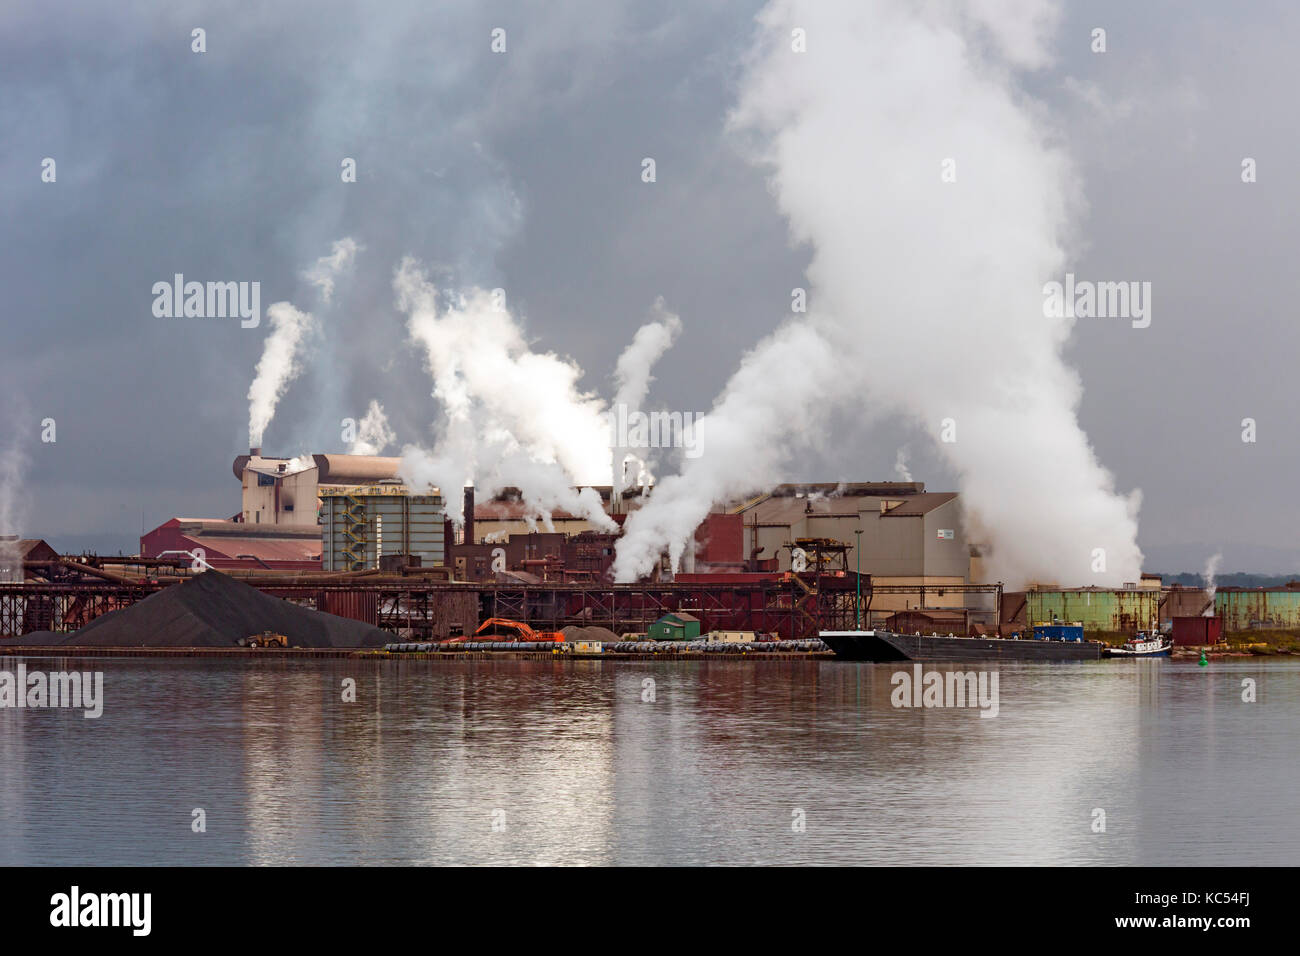 Sault Ste. Marie, Ontario Canada - The Algoma steel mill on the shore of the St. Mary's River. Stock Photo